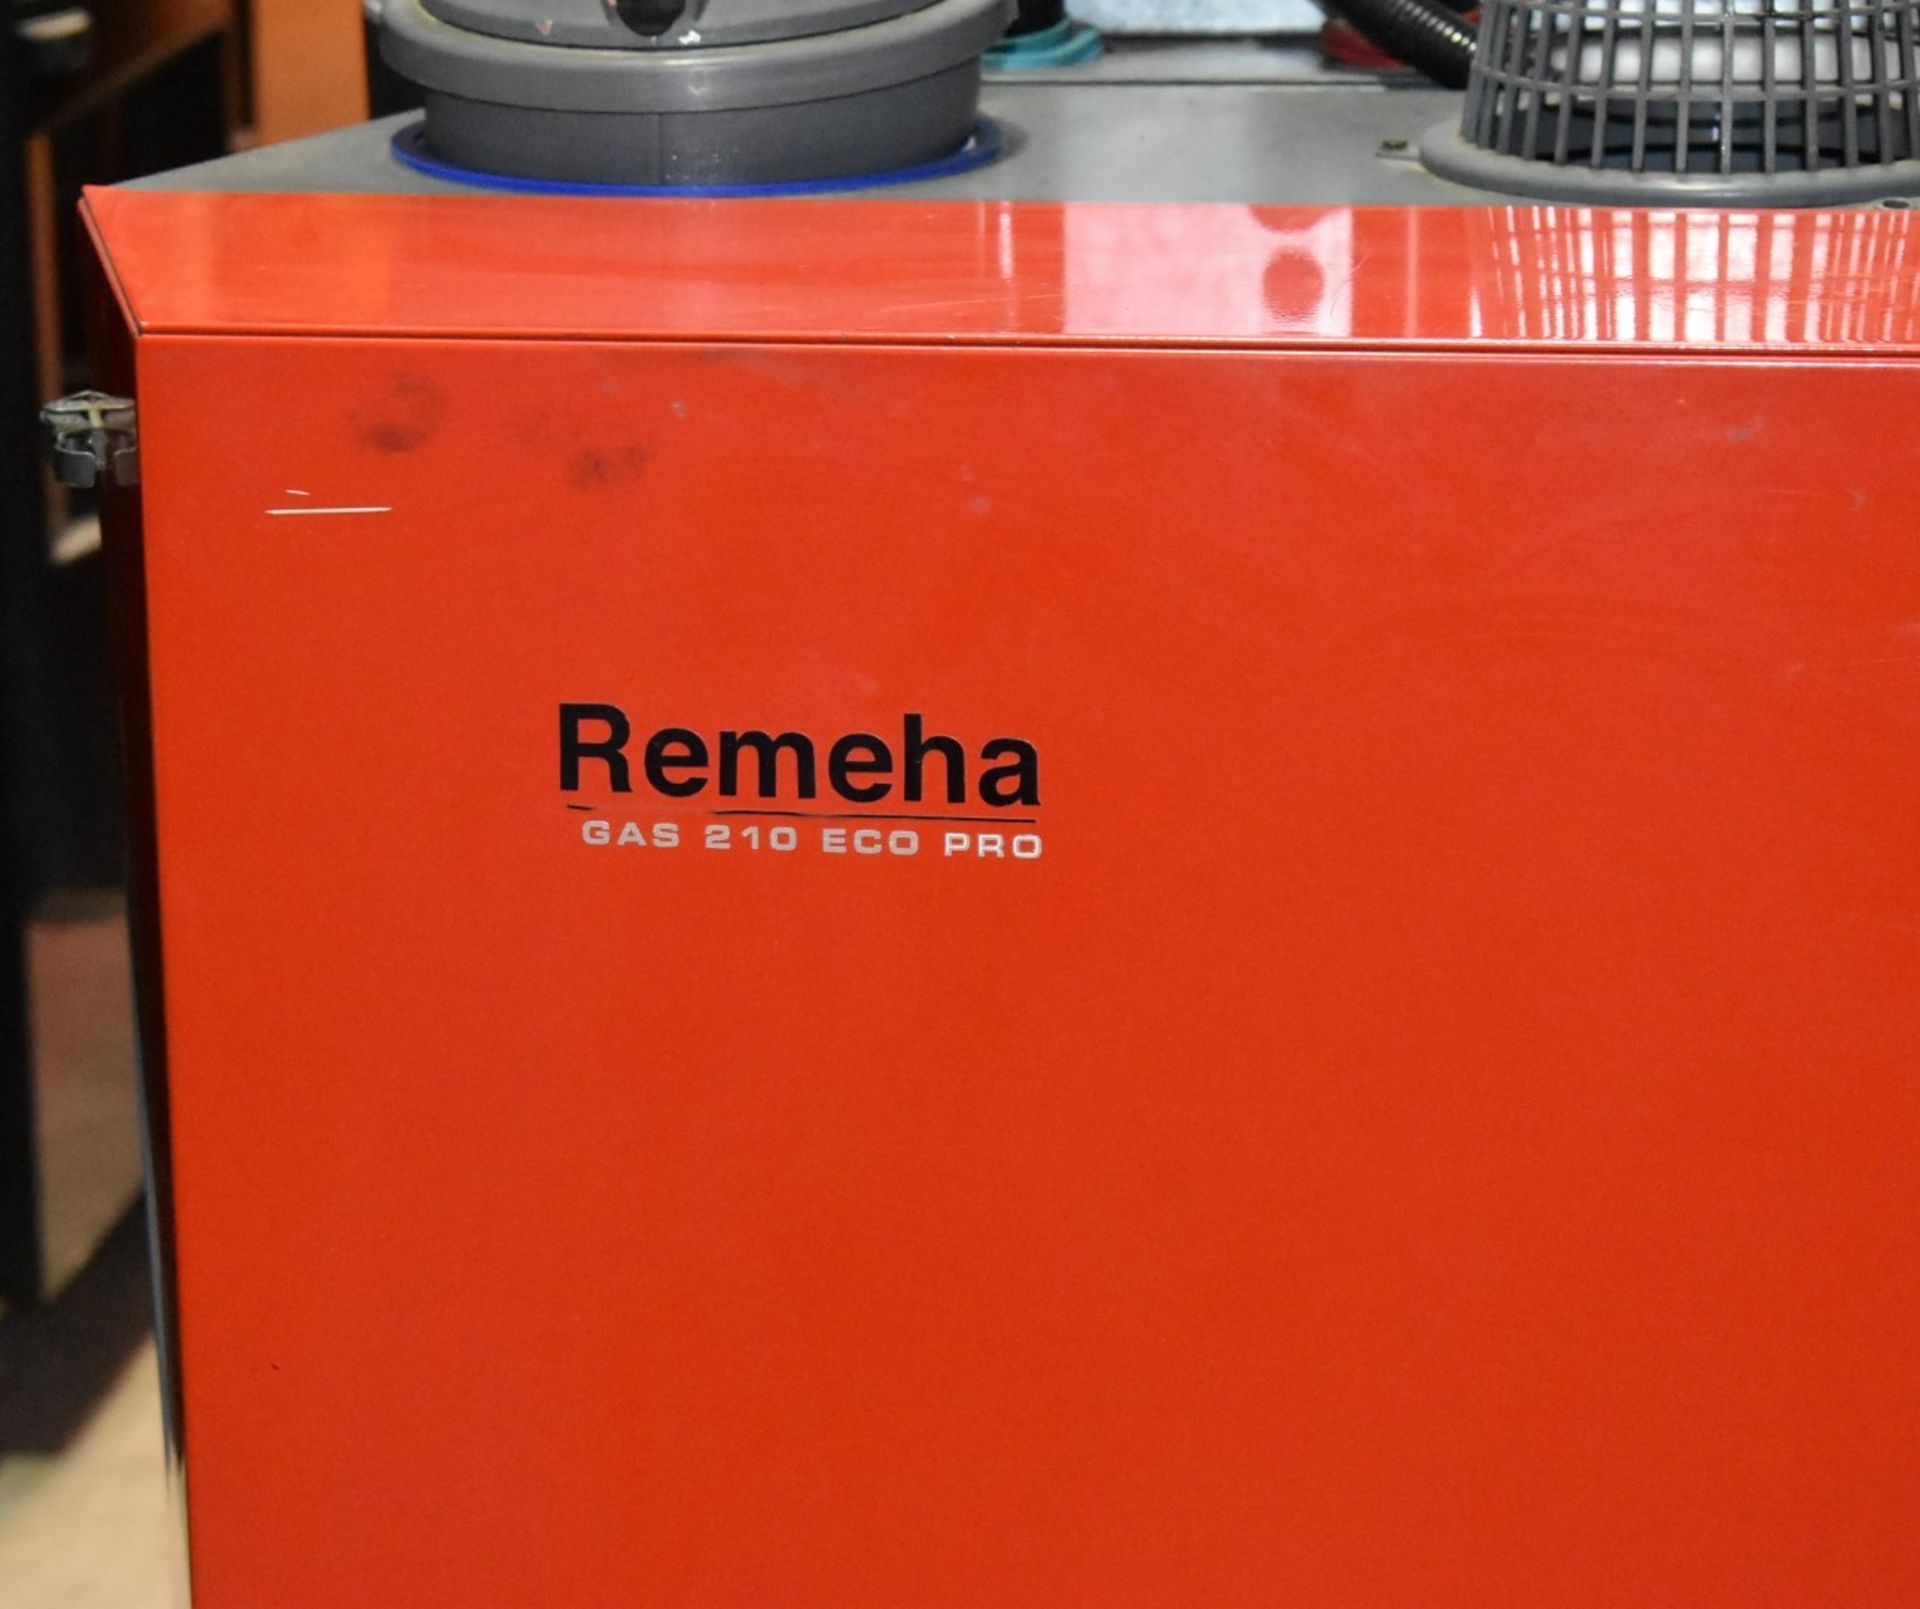 1 x Brohag Remeha Gas 210 Eco Pro Floor Standing Commercial Boiler - Ref: WH2-140 H7B - CL711 - - Image 2 of 10